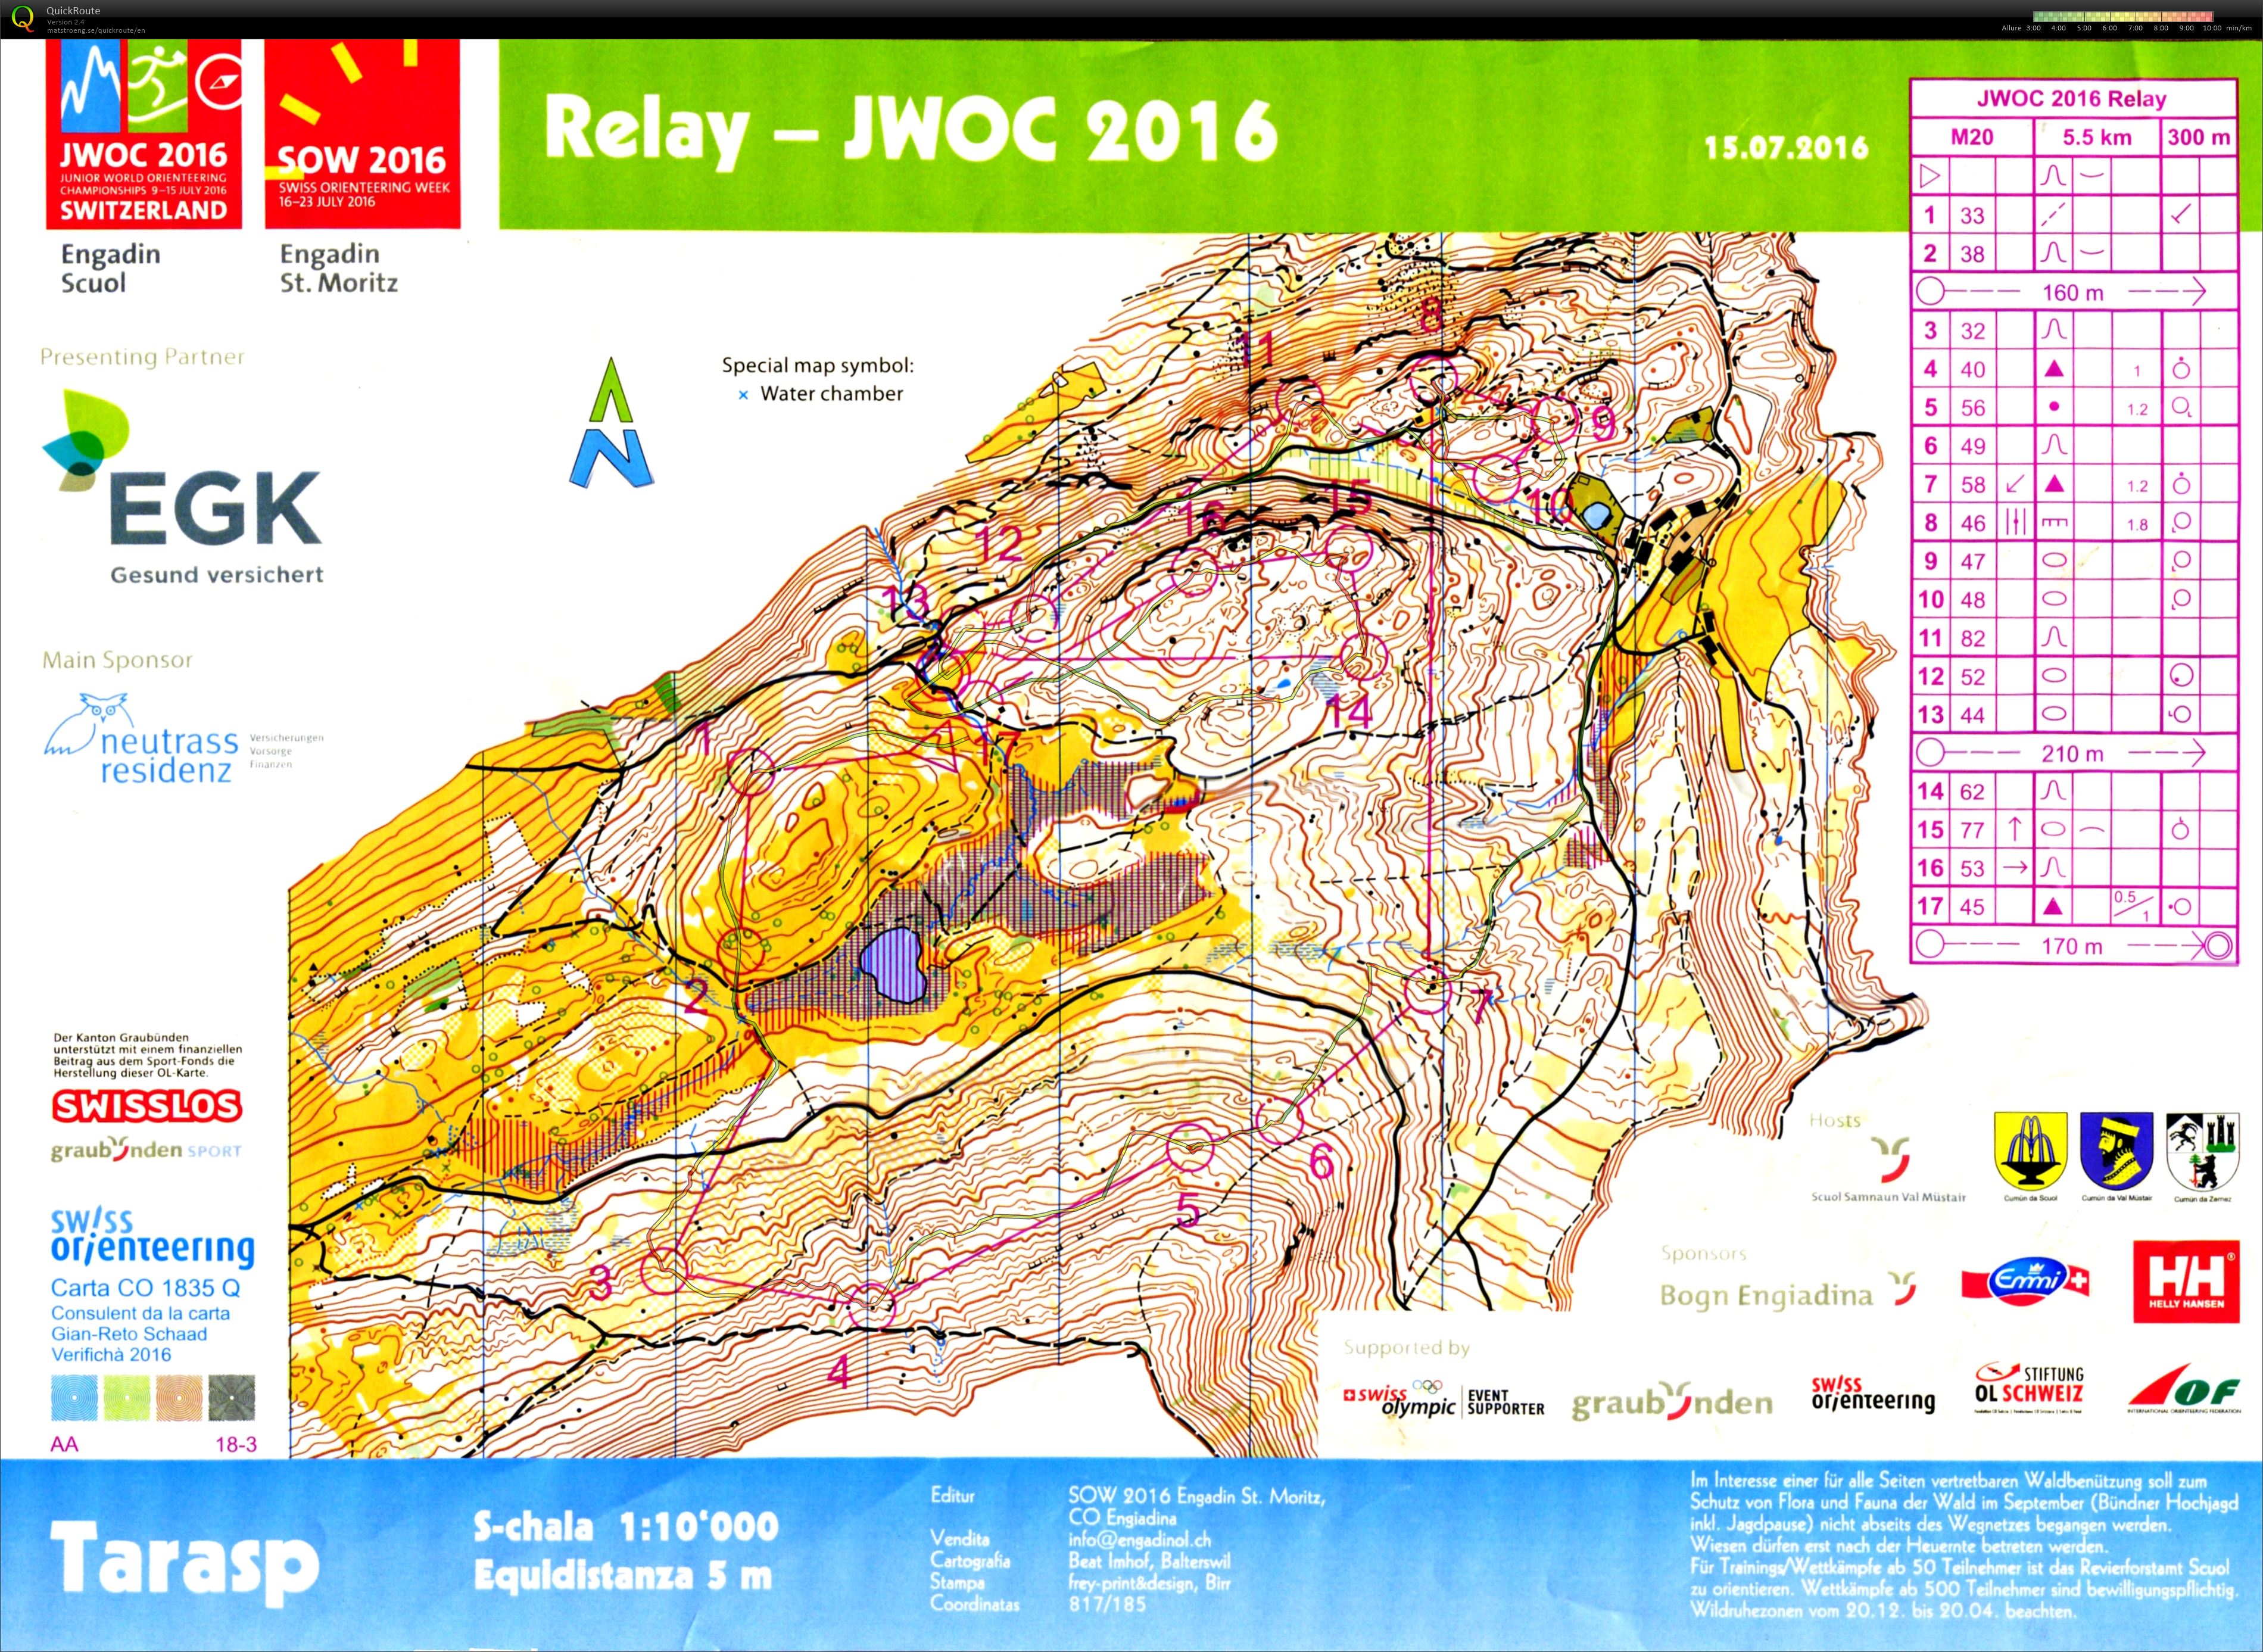 JWOC Relay for training (15/07/2016)